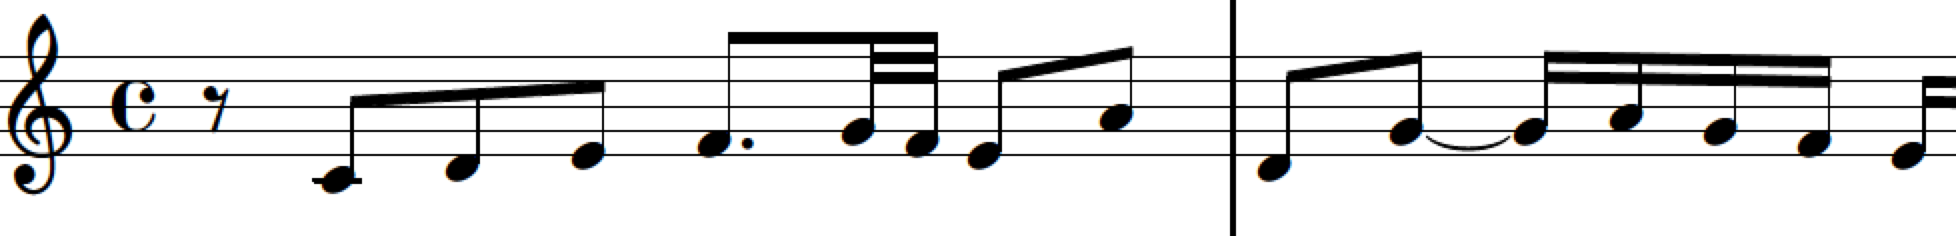 Theme of Fugue 1 in C Major